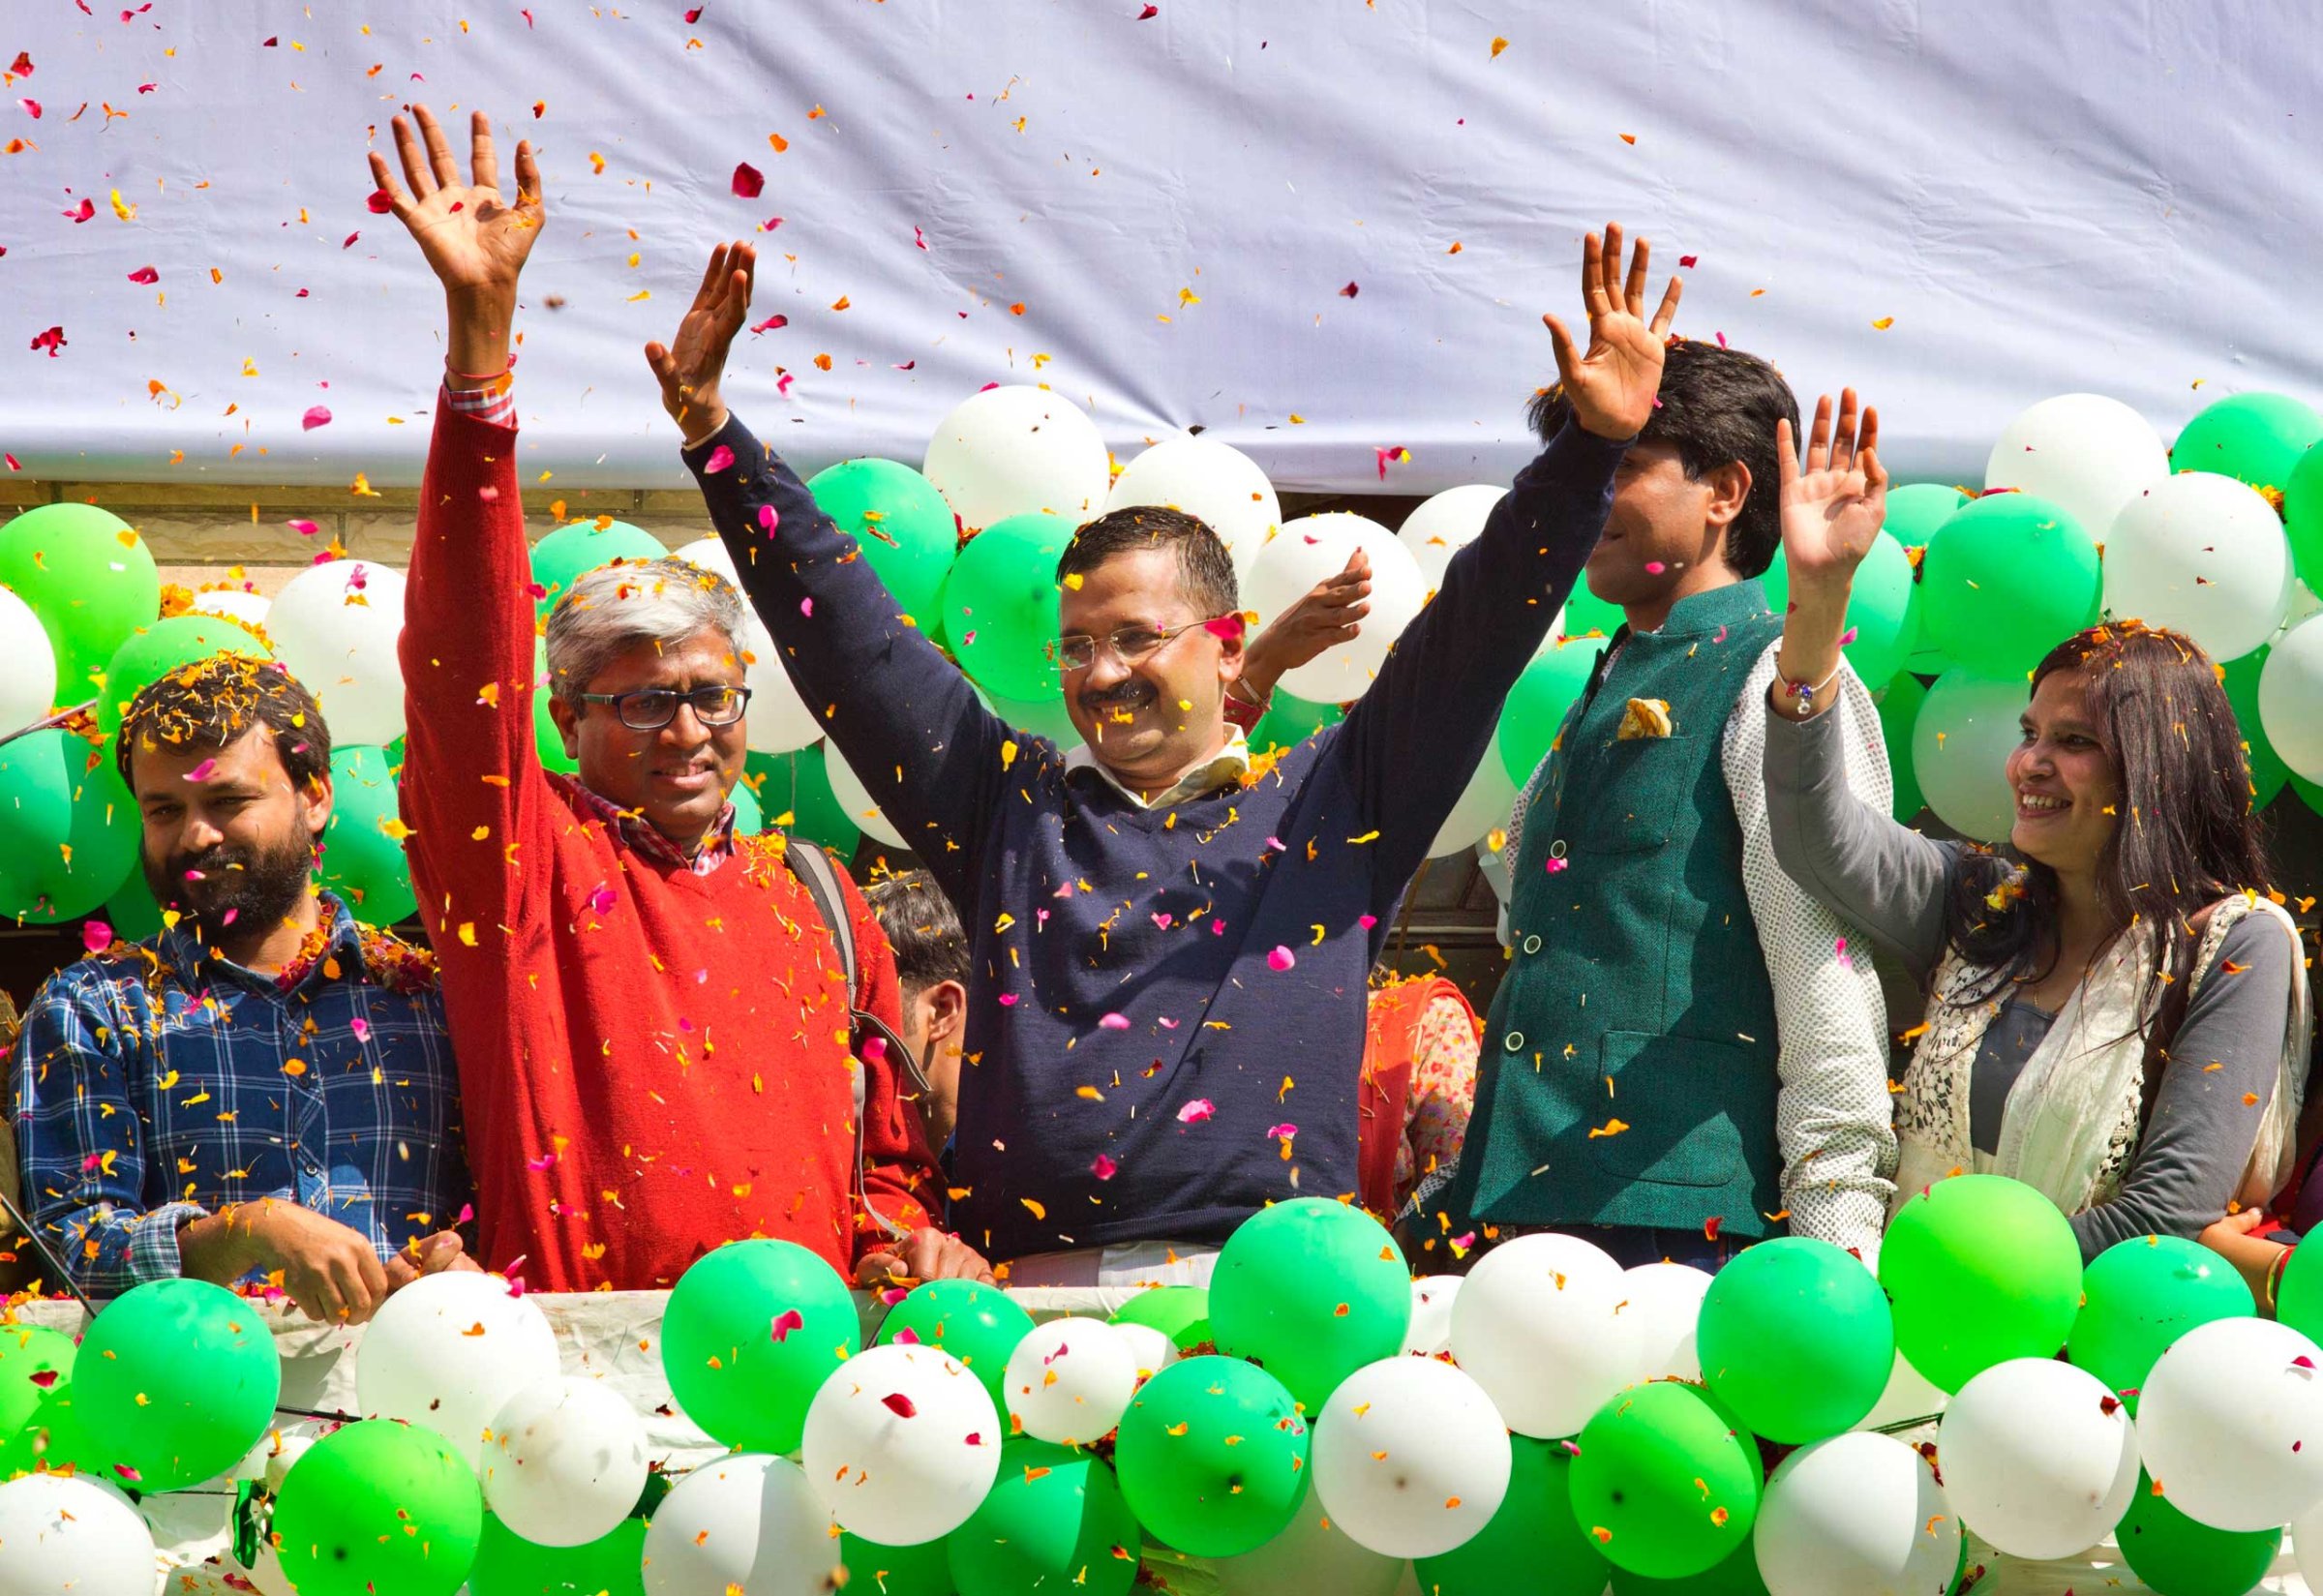 Indian Aam Aadmi Party leader Arvind Kejriwal speaks to supporters as he celebrates victory in the state assembly elections outside the party's headquarters in New Delhi on Feb. 10, 2015.